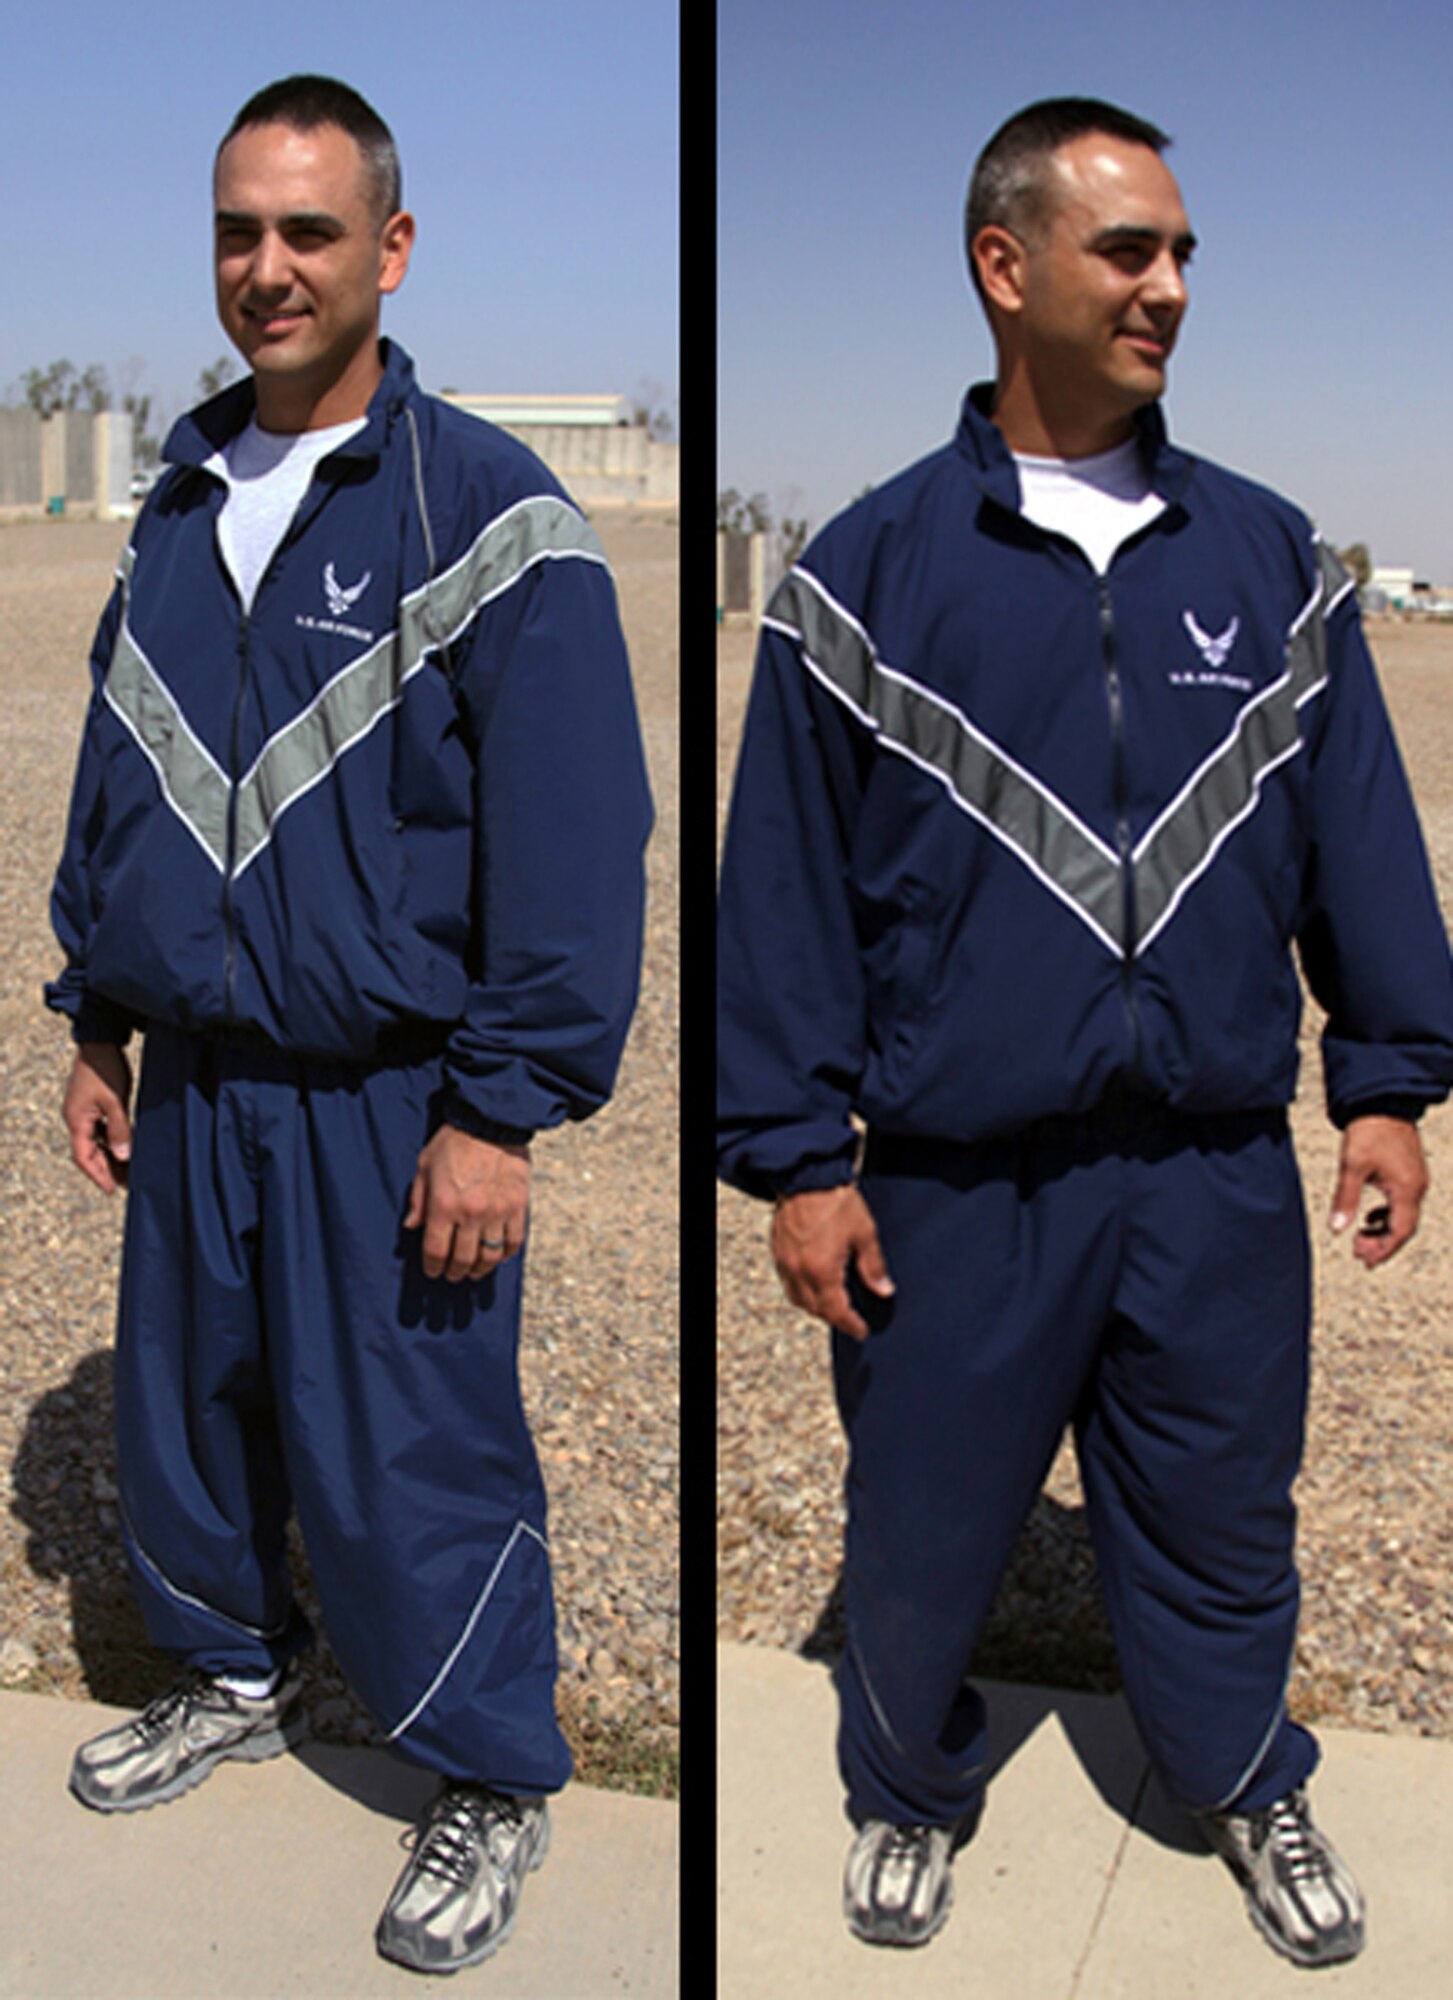 Senior Airman James Debiase models the current physical training uniform (left) and the modified PT uniform (right) April 13 at Joint Base Balad, Iraq. Airman Debiase was selected to field-test the PT uniform while deployed here from Dyess Air Force Base, Texas, and to provide feedback to leadership at the end of April. Airman Debiase is a 332nd Expeditionary Civil Engineer Squadron emergency manager, and his hometown is Glastonbury, Conn. (U.S. Air Force photo illustration) 